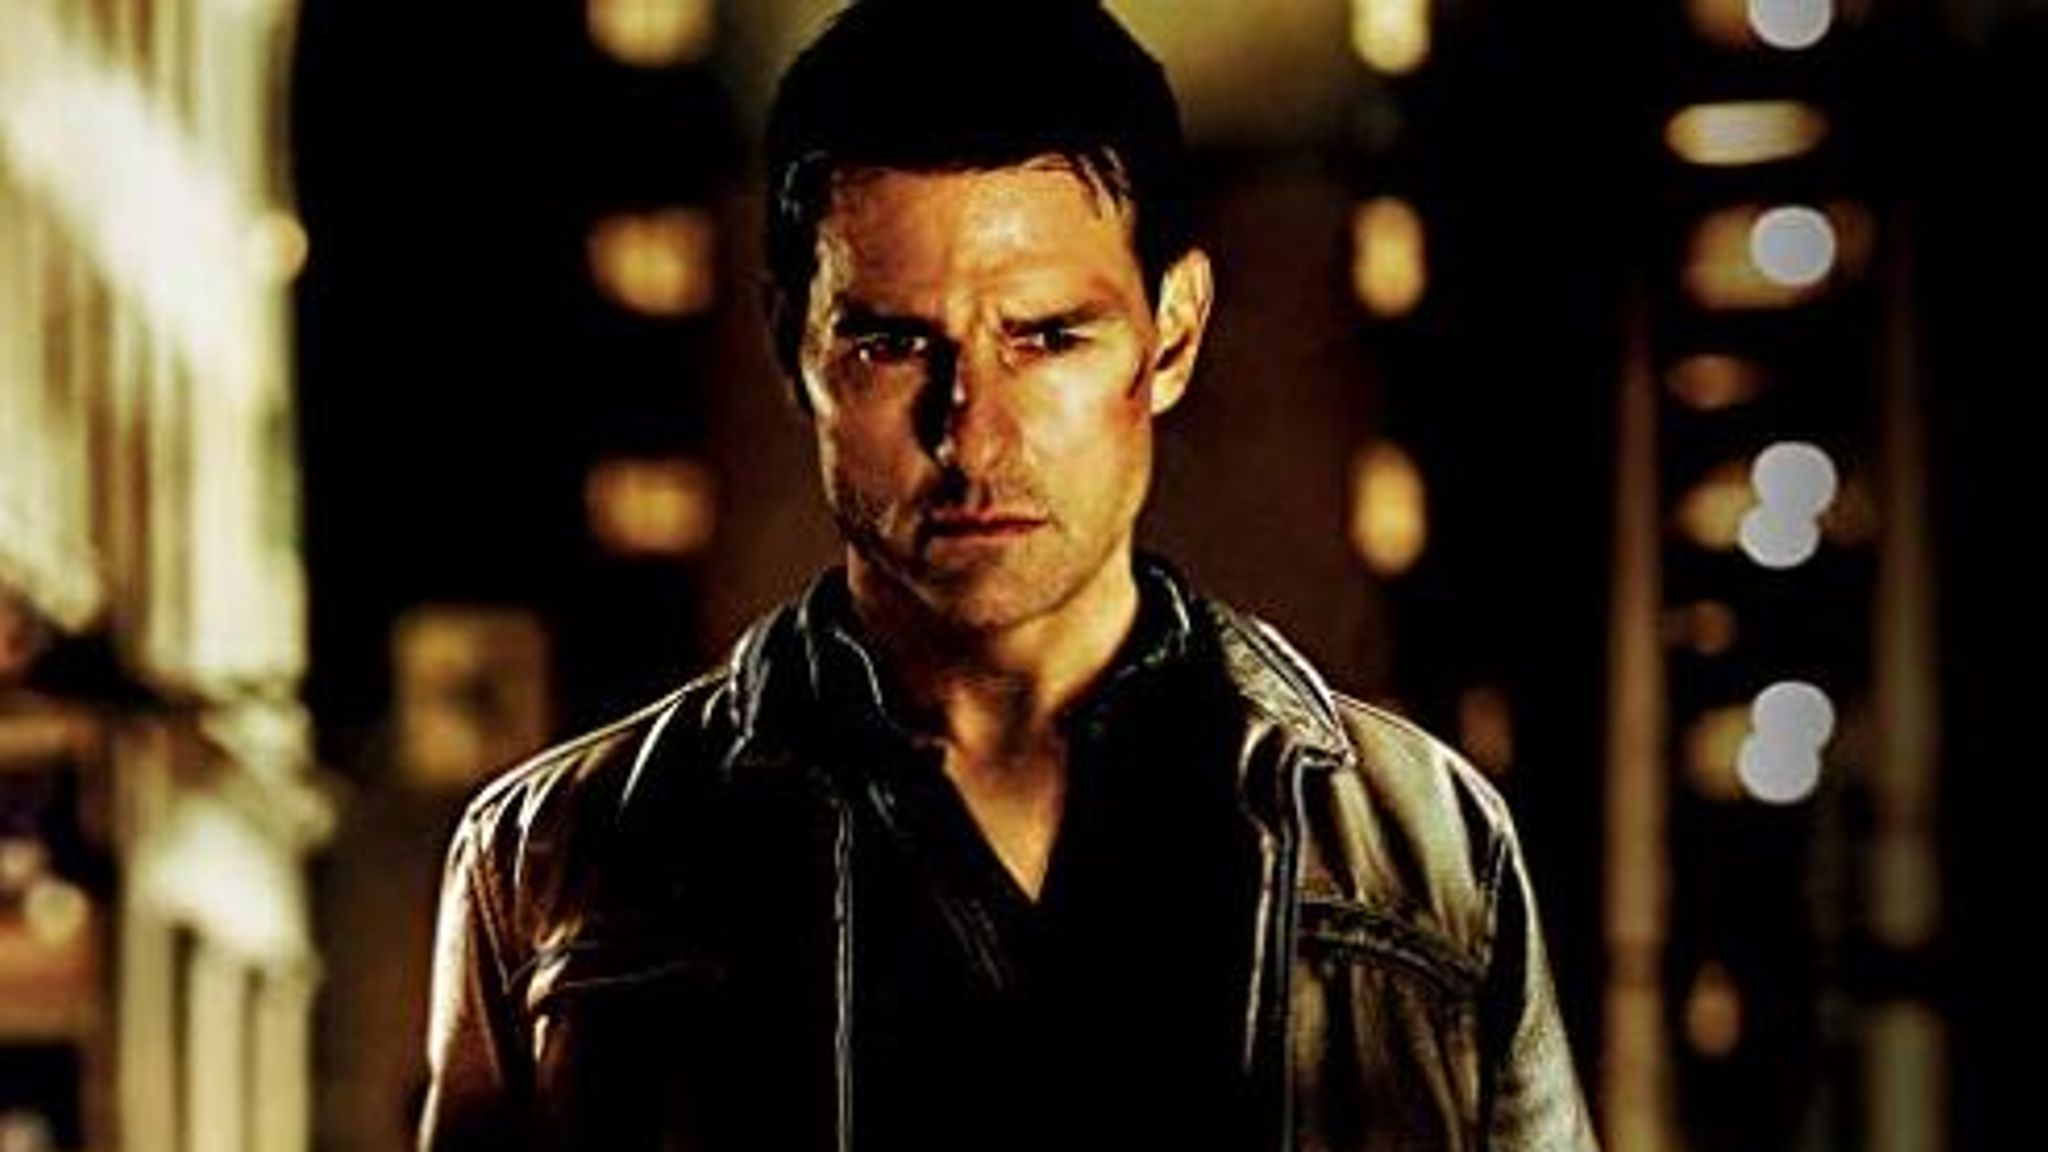 Who is the new jack reacher